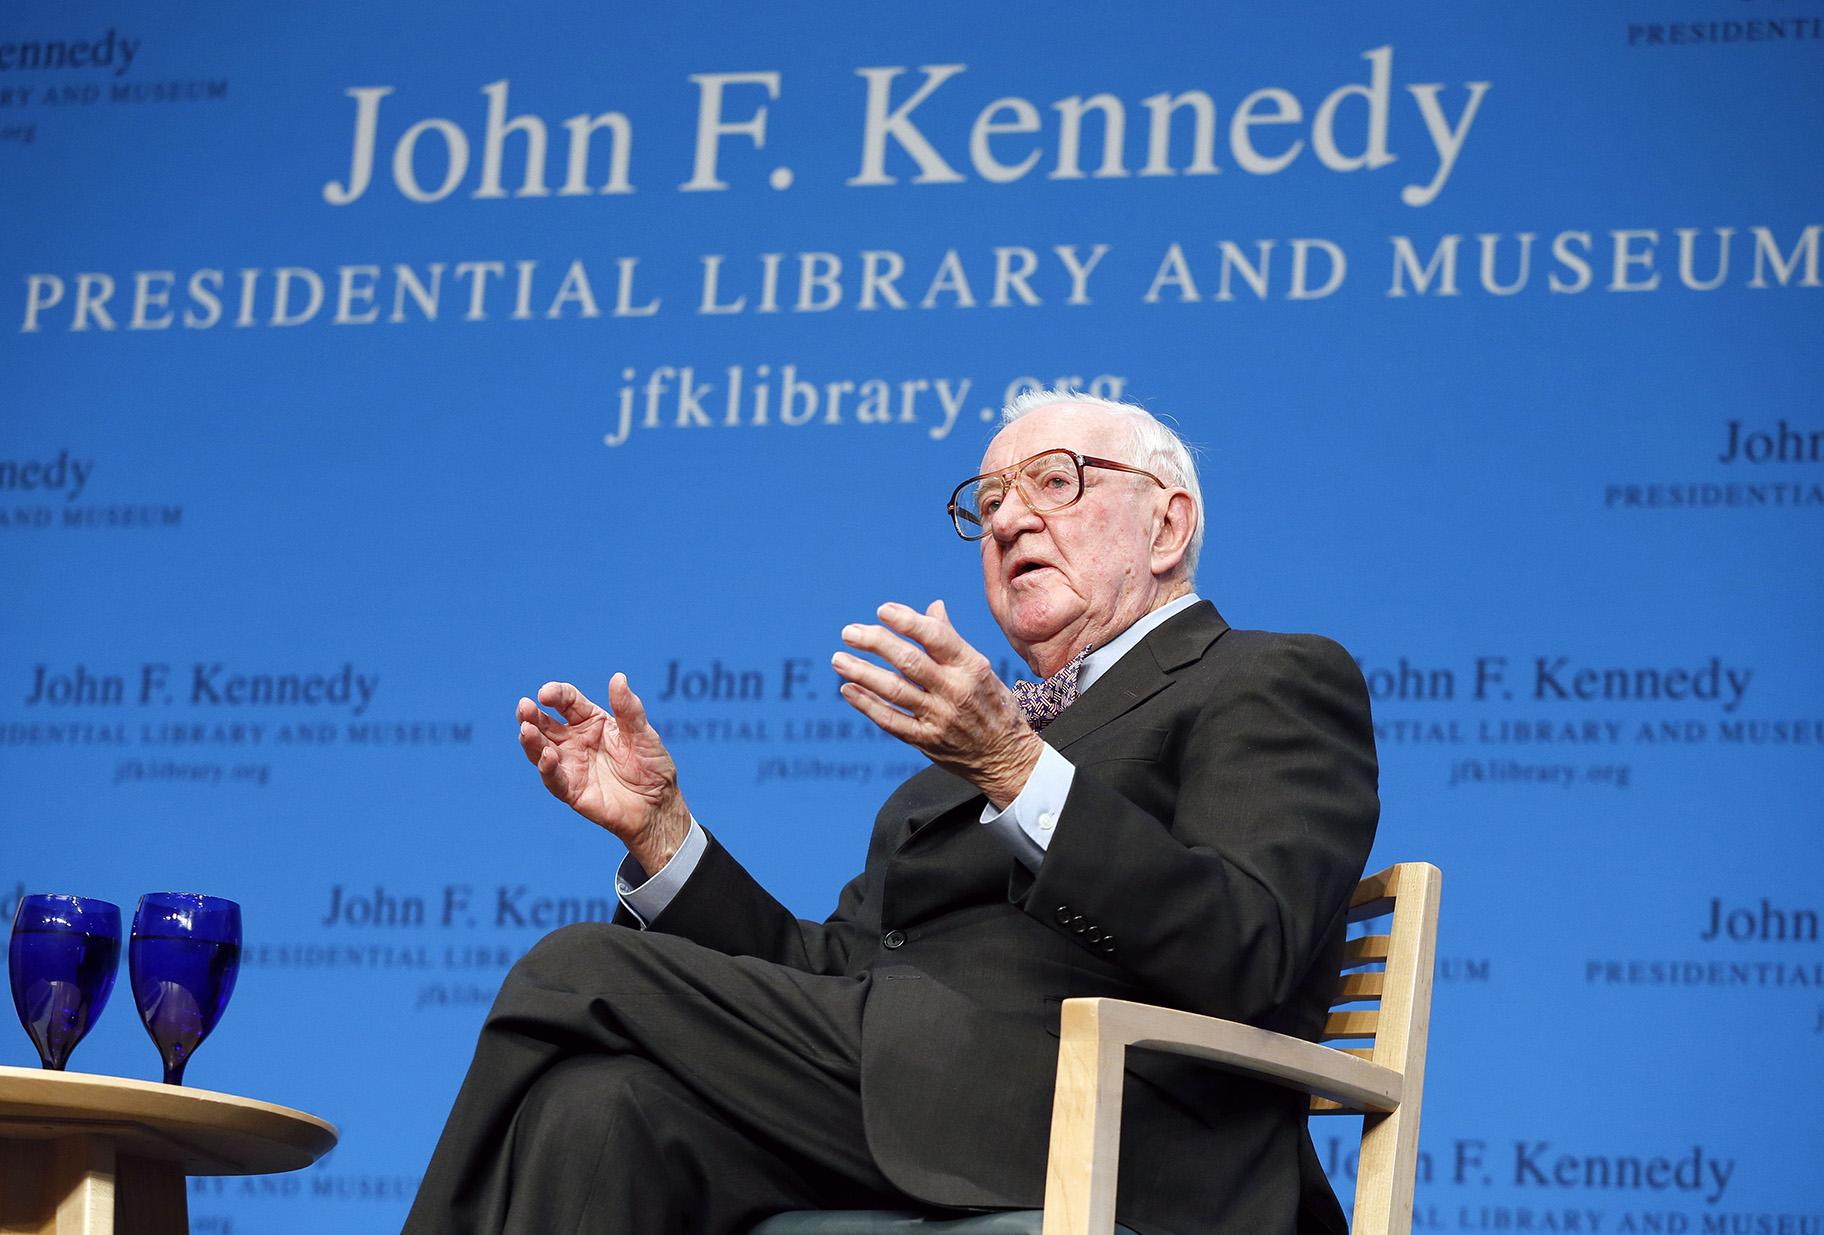 In this May 20, 2013 file photo, retired U.S. Supreme Court Justice John Paul Stevens talks about his views and career during a forum at the John F. Kennedy Library in Boston. (AP Photo / Michael Dwyer, File)